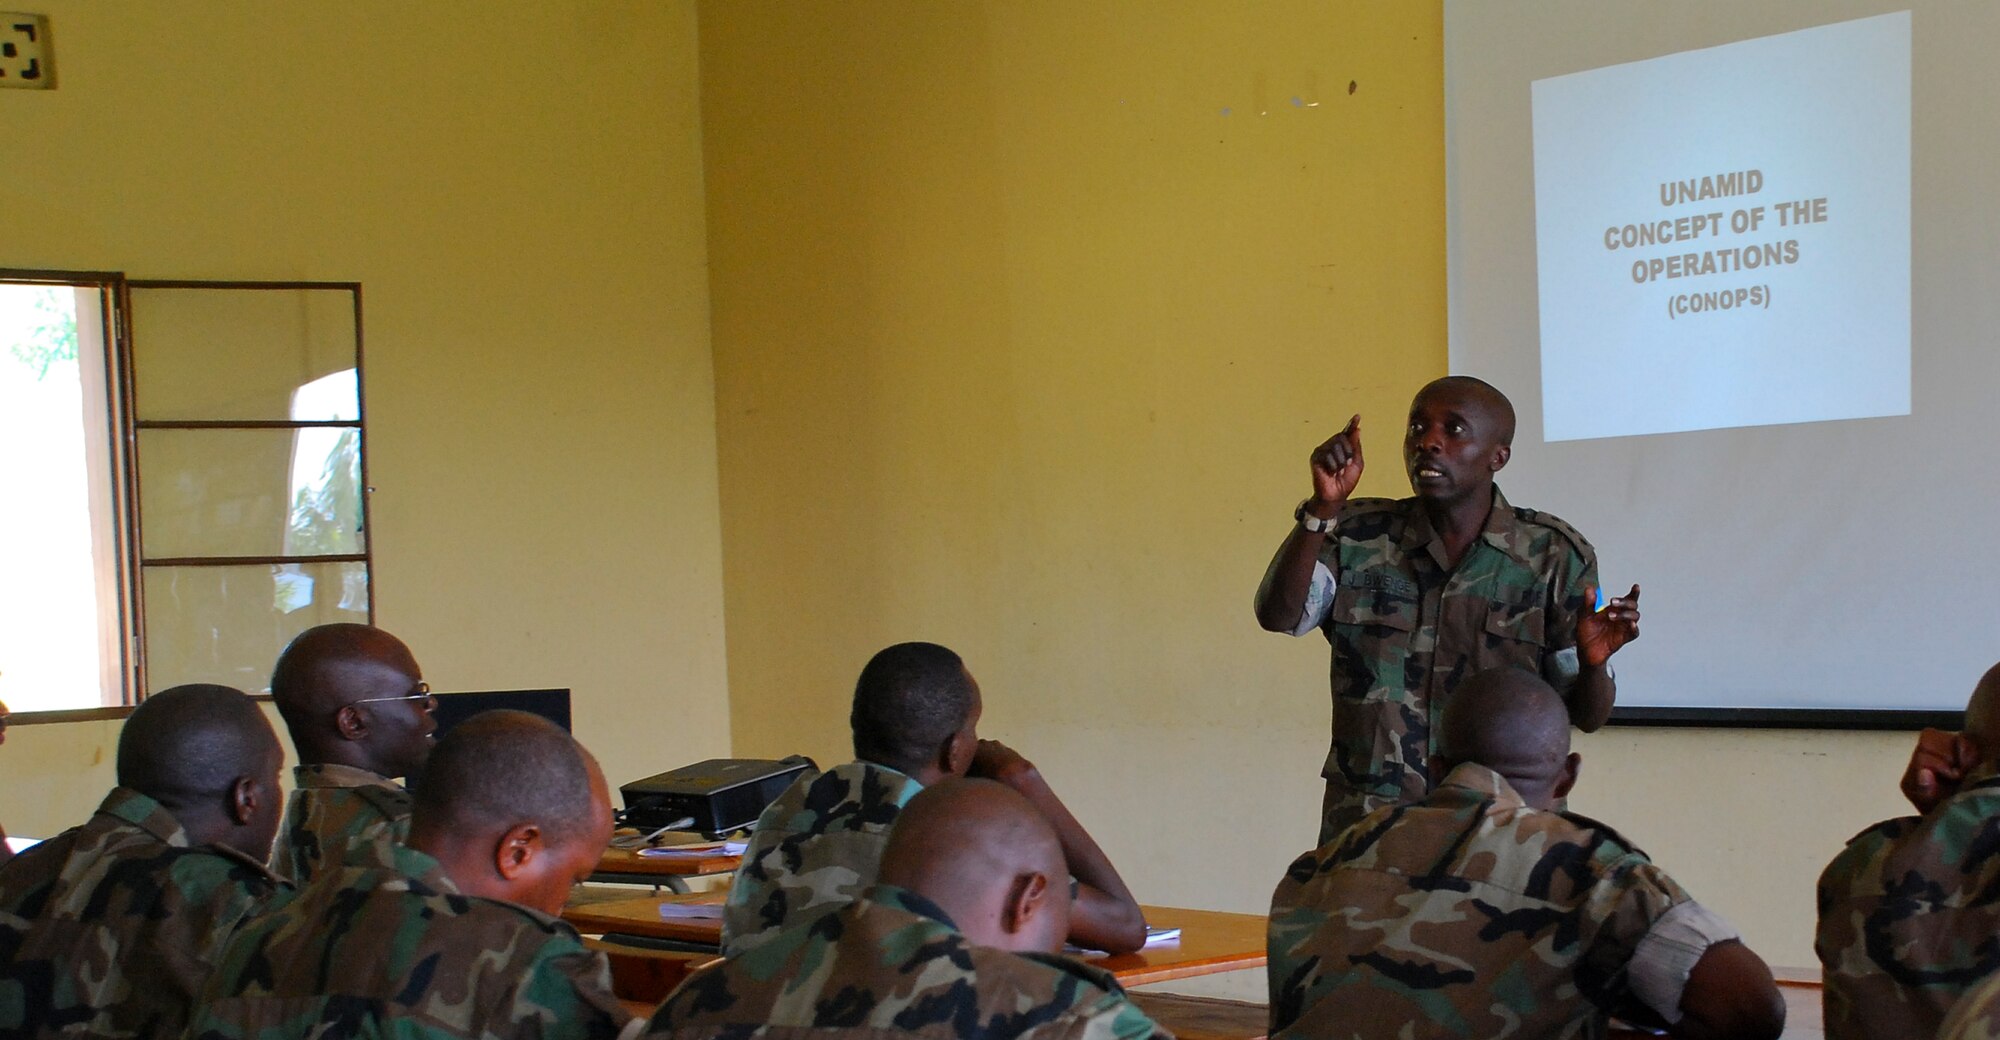 GAKO, Rwanda -- A Captain in the Rwanda Defense Forces gives an overview of the United Nations-Africa Union Mission in Darfur to peacekeeper trainees at the Rwandan Military Academy here Jan. 12, 2009. This training is conducted under the Africa Contingency Operations Training Assistance Program.  Here the entire curriculum is taught by Rwandan instructors.  Rwanda was the first county in Africa to be able to provide this training to its soldiers without U.S. instructors.  
ACOTA is a joint State Department and Department of Defense program.  About 12,000 Rwandan soldiers have been trained under the ACOTA program including the 3454 Rwandan peacekeepers currently deployed to Sudan.
(Photo by Staff Sergeant Samuel Bendet, U.S. Africa Command)